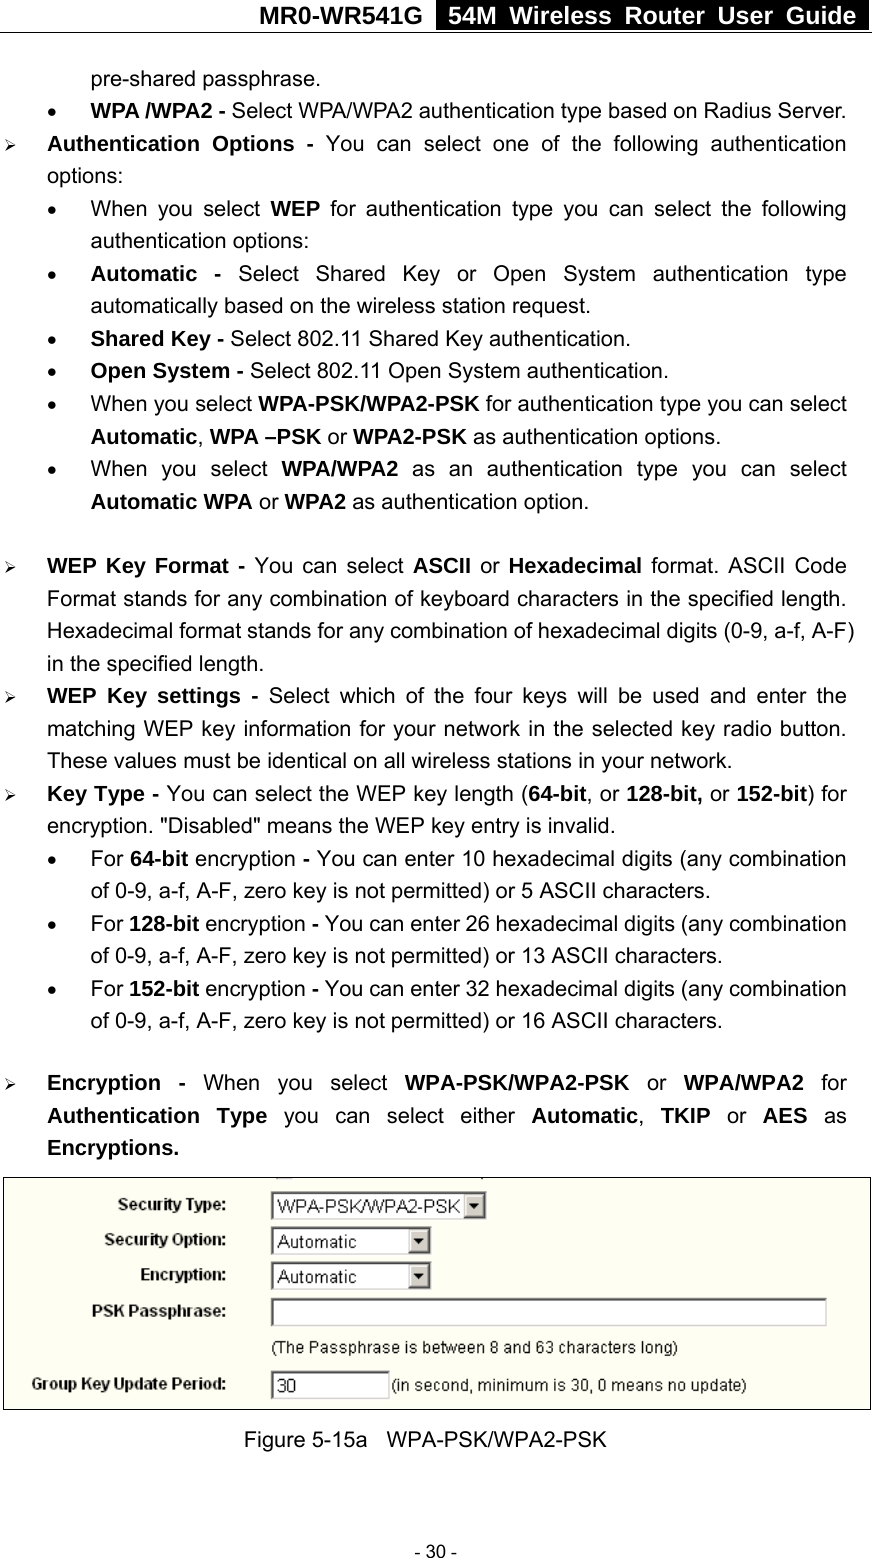 MR0-WR541G   54M Wireless Router User Guide  pre-shared passphrase.   • WPA /WPA2 - Select WPA/WPA2 authentication type based on Radius Server. ¾ Authentication Options - You can select one of the following authentication options:  • When you select WEP for authentication type you can select the following authentication options: • Automatic - Select Shared Key or Open System authentication type automatically based on the wireless station request. • Shared Key - Select 802.11 Shared Key authentication. • Open System - Select 802.11 Open System authentication. • When you select WPA-PSK/WPA2-PSK for authentication type you can select Automatic, WPA –PSK or WPA2-PSK as authentication options. • When you select WPA/WPA2 as an authentication type you can select Automatic WPA or WPA2 as authentication option.  ¾ WEP Key Format - You can select ASCII or  Hexadecimal format. ASCII Code Format stands for any combination of keyboard characters in the specified length. Hexadecimal format stands for any combination of hexadecimal digits (0-9, a-f, A-F) in the specified length. ¾ WEP Key settings - Select which of the four keys will be used and enter the matching WEP key information for your network in the selected key radio button. These values must be identical on all wireless stations in your network. ¾ Key Type - You can select the WEP key length (64-bit, or 128-bit, or 152-bit) for encryption. &quot;Disabled&quot; means the WEP key entry is invalid. • For 64-bit encryption - You can enter 10 hexadecimal digits (any combination of 0-9, a-f, A-F, zero key is not permitted) or 5 ASCII characters.   • For 128-bit encryption - You can enter 26 hexadecimal digits (any combination of 0-9, a-f, A-F, zero key is not permitted) or 13 ASCII characters. • For 152-bit encryption - You can enter 32 hexadecimal digits (any combination of 0-9, a-f, A-F, zero key is not permitted) or 16 ASCII characters. ¾ Encryption - When you select WPA-PSK/WPA2-PSK or WPA/WPA2 for Authentication Type you can select either Automatic, TKIP or AES as Encryptions.  Figure 5-15a  WPA-PSK/WPA2-PSK  - 30 - 